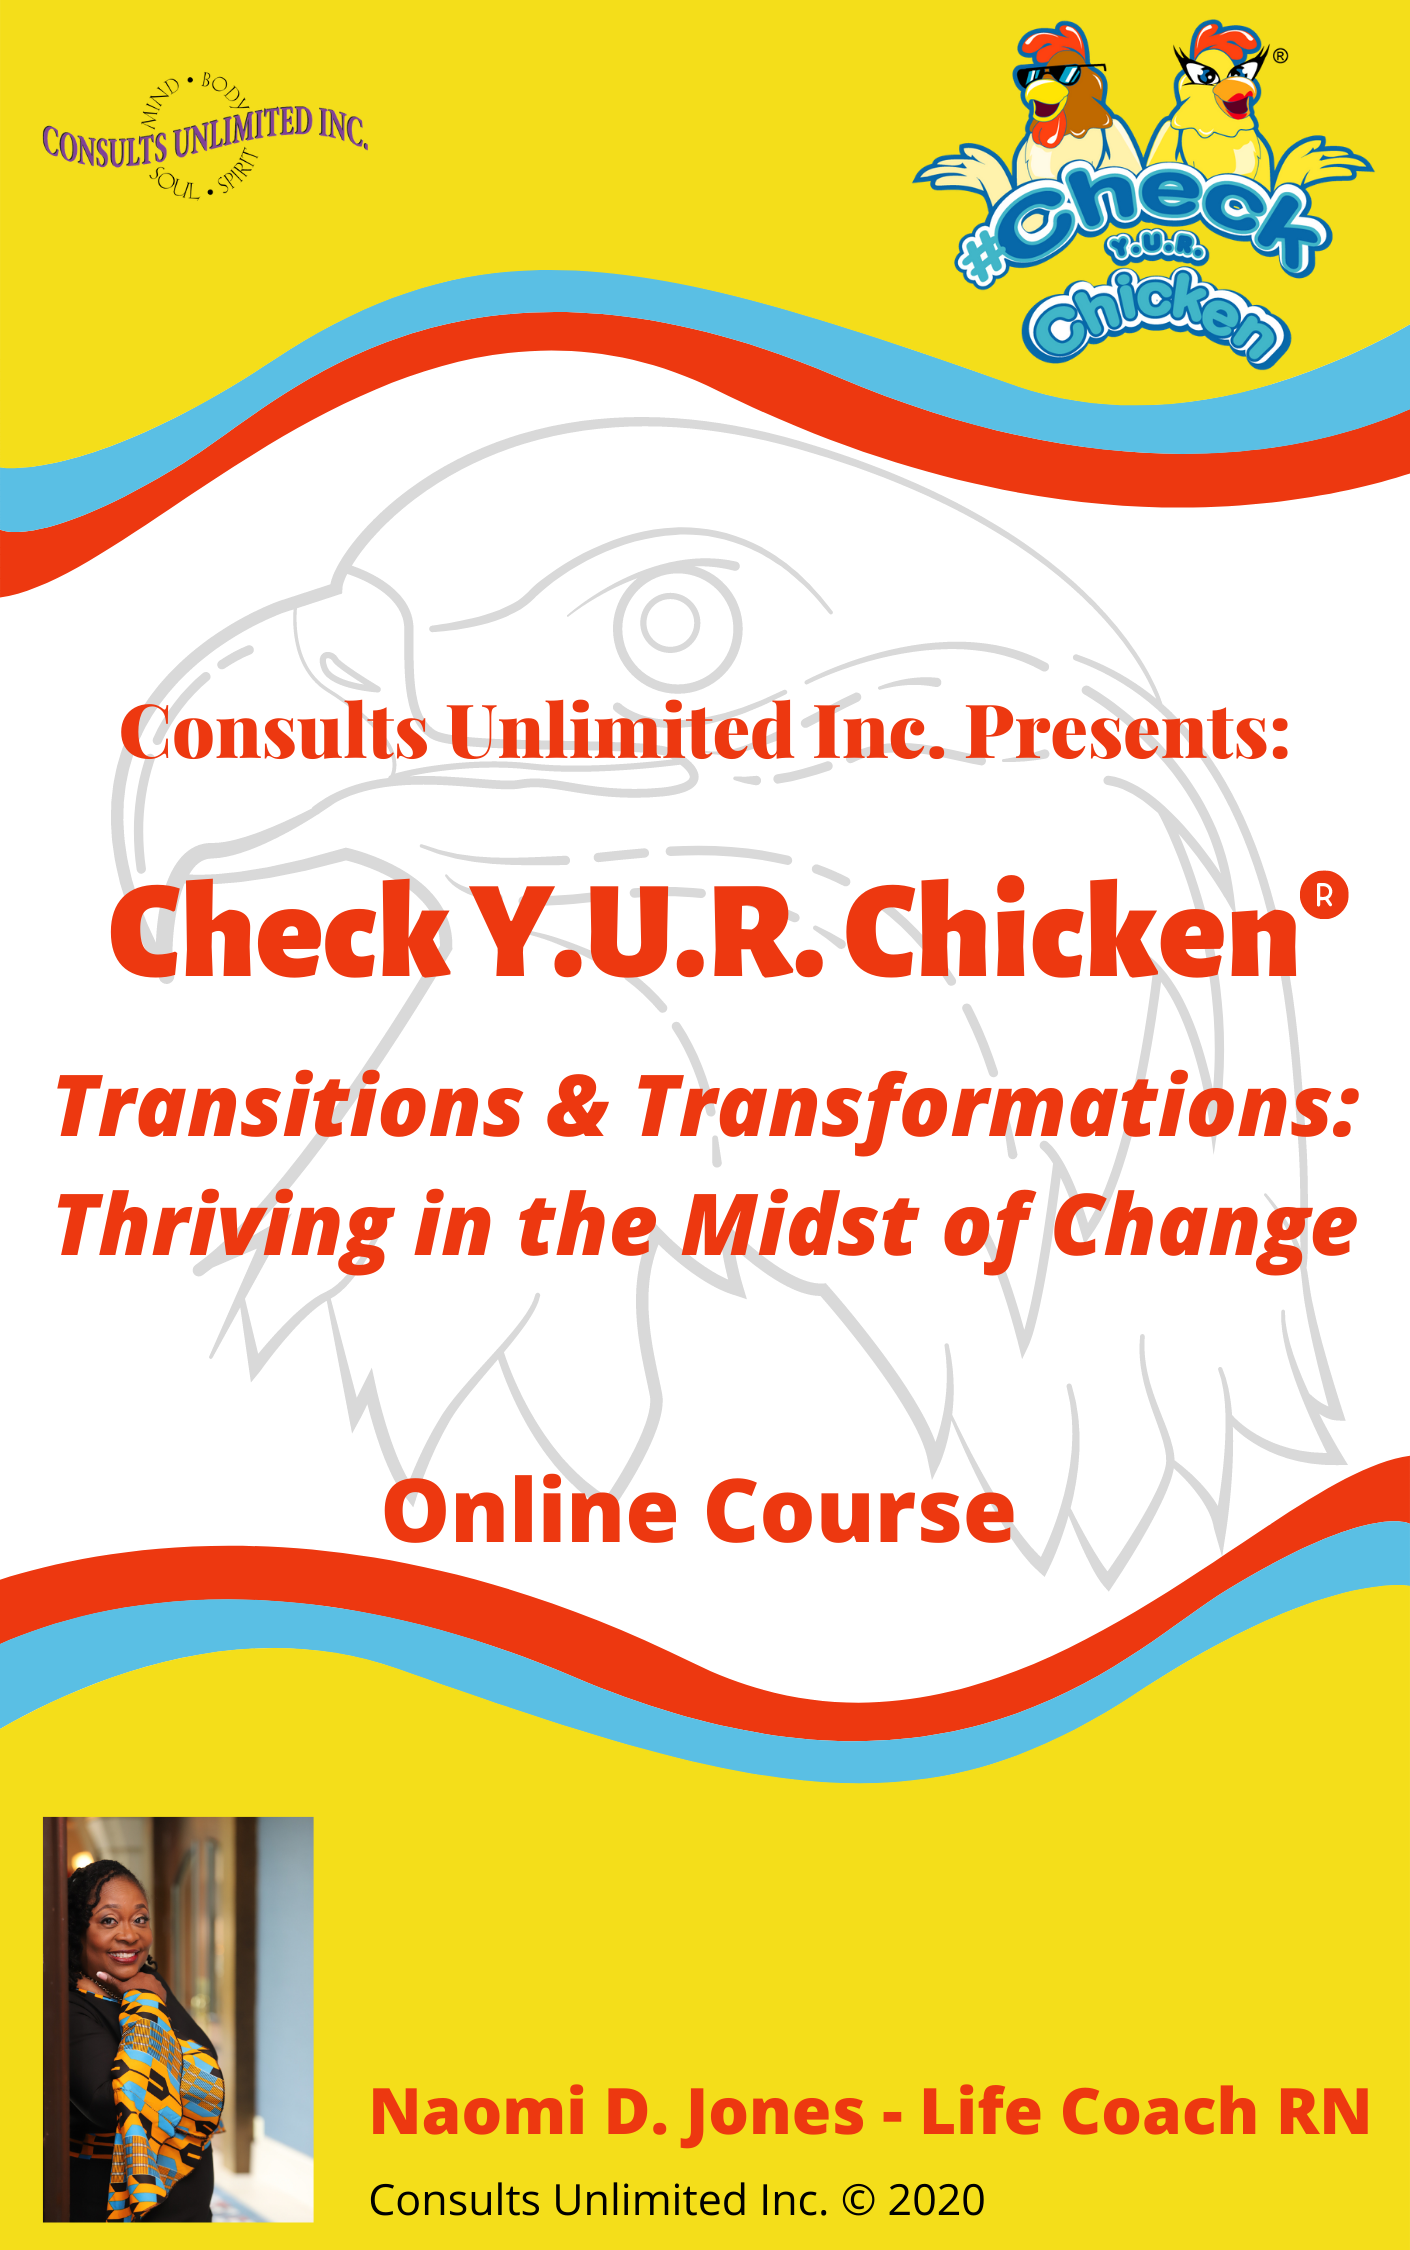 Transitions and Transformations Online Course